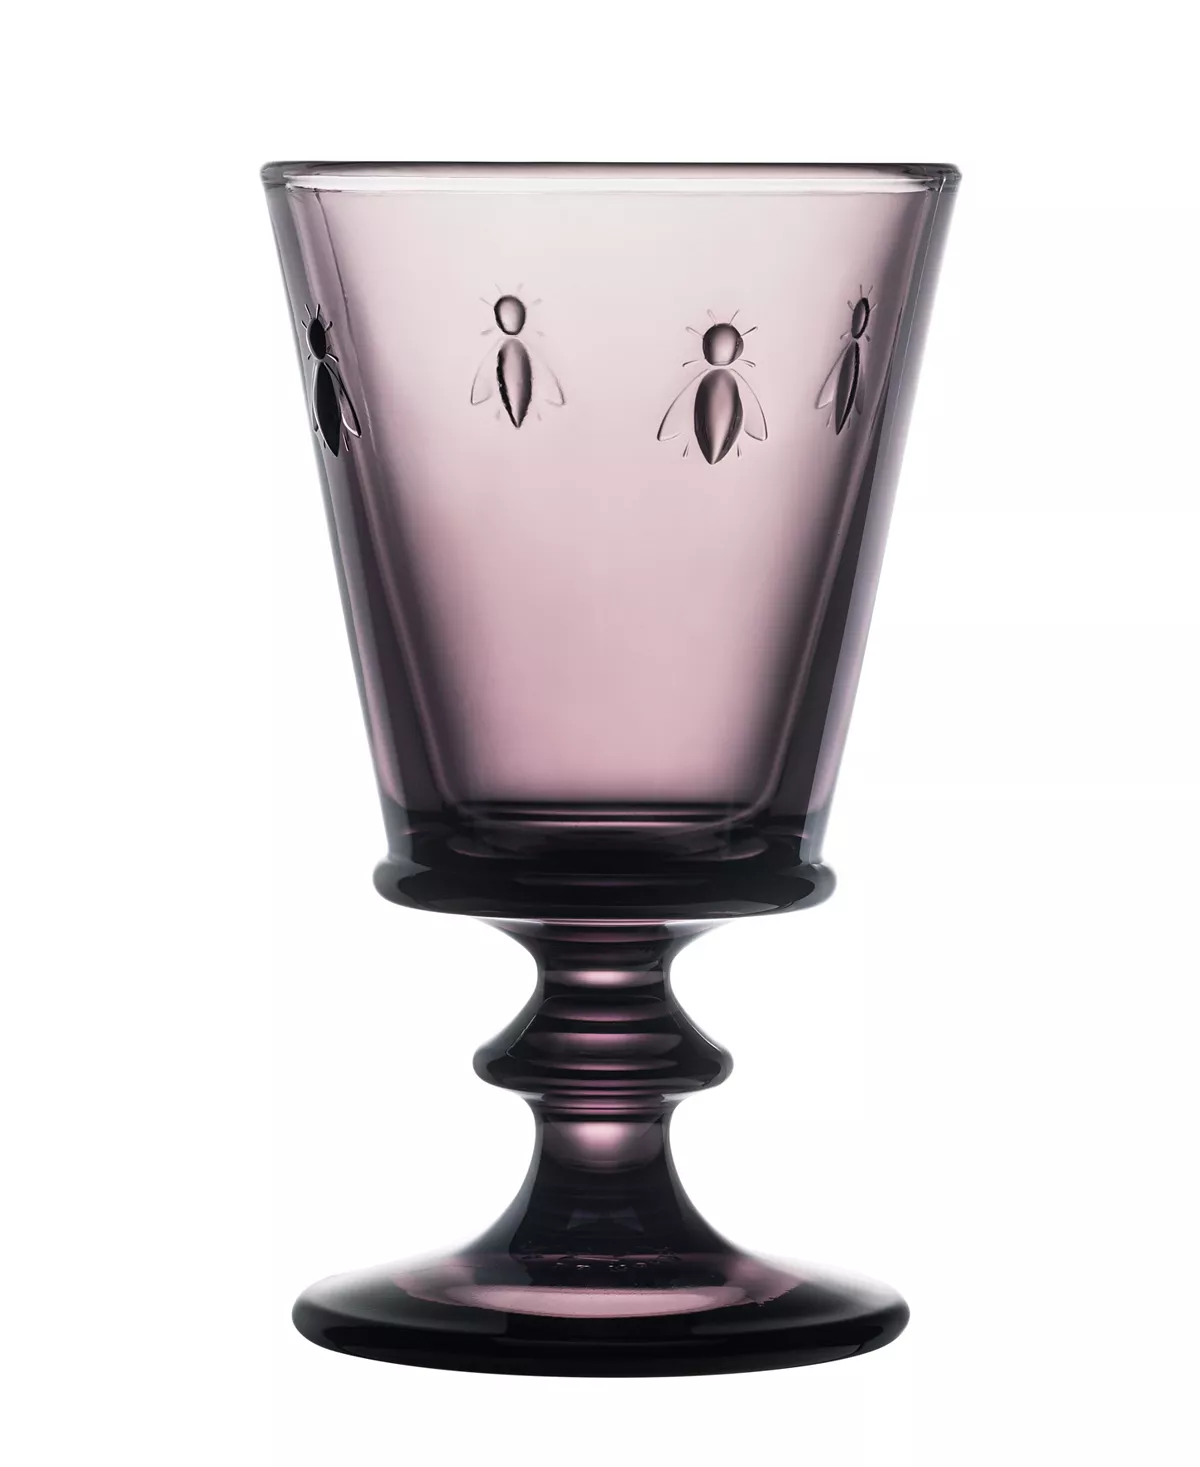 Purple wine glass with small bees engraved into the glasses